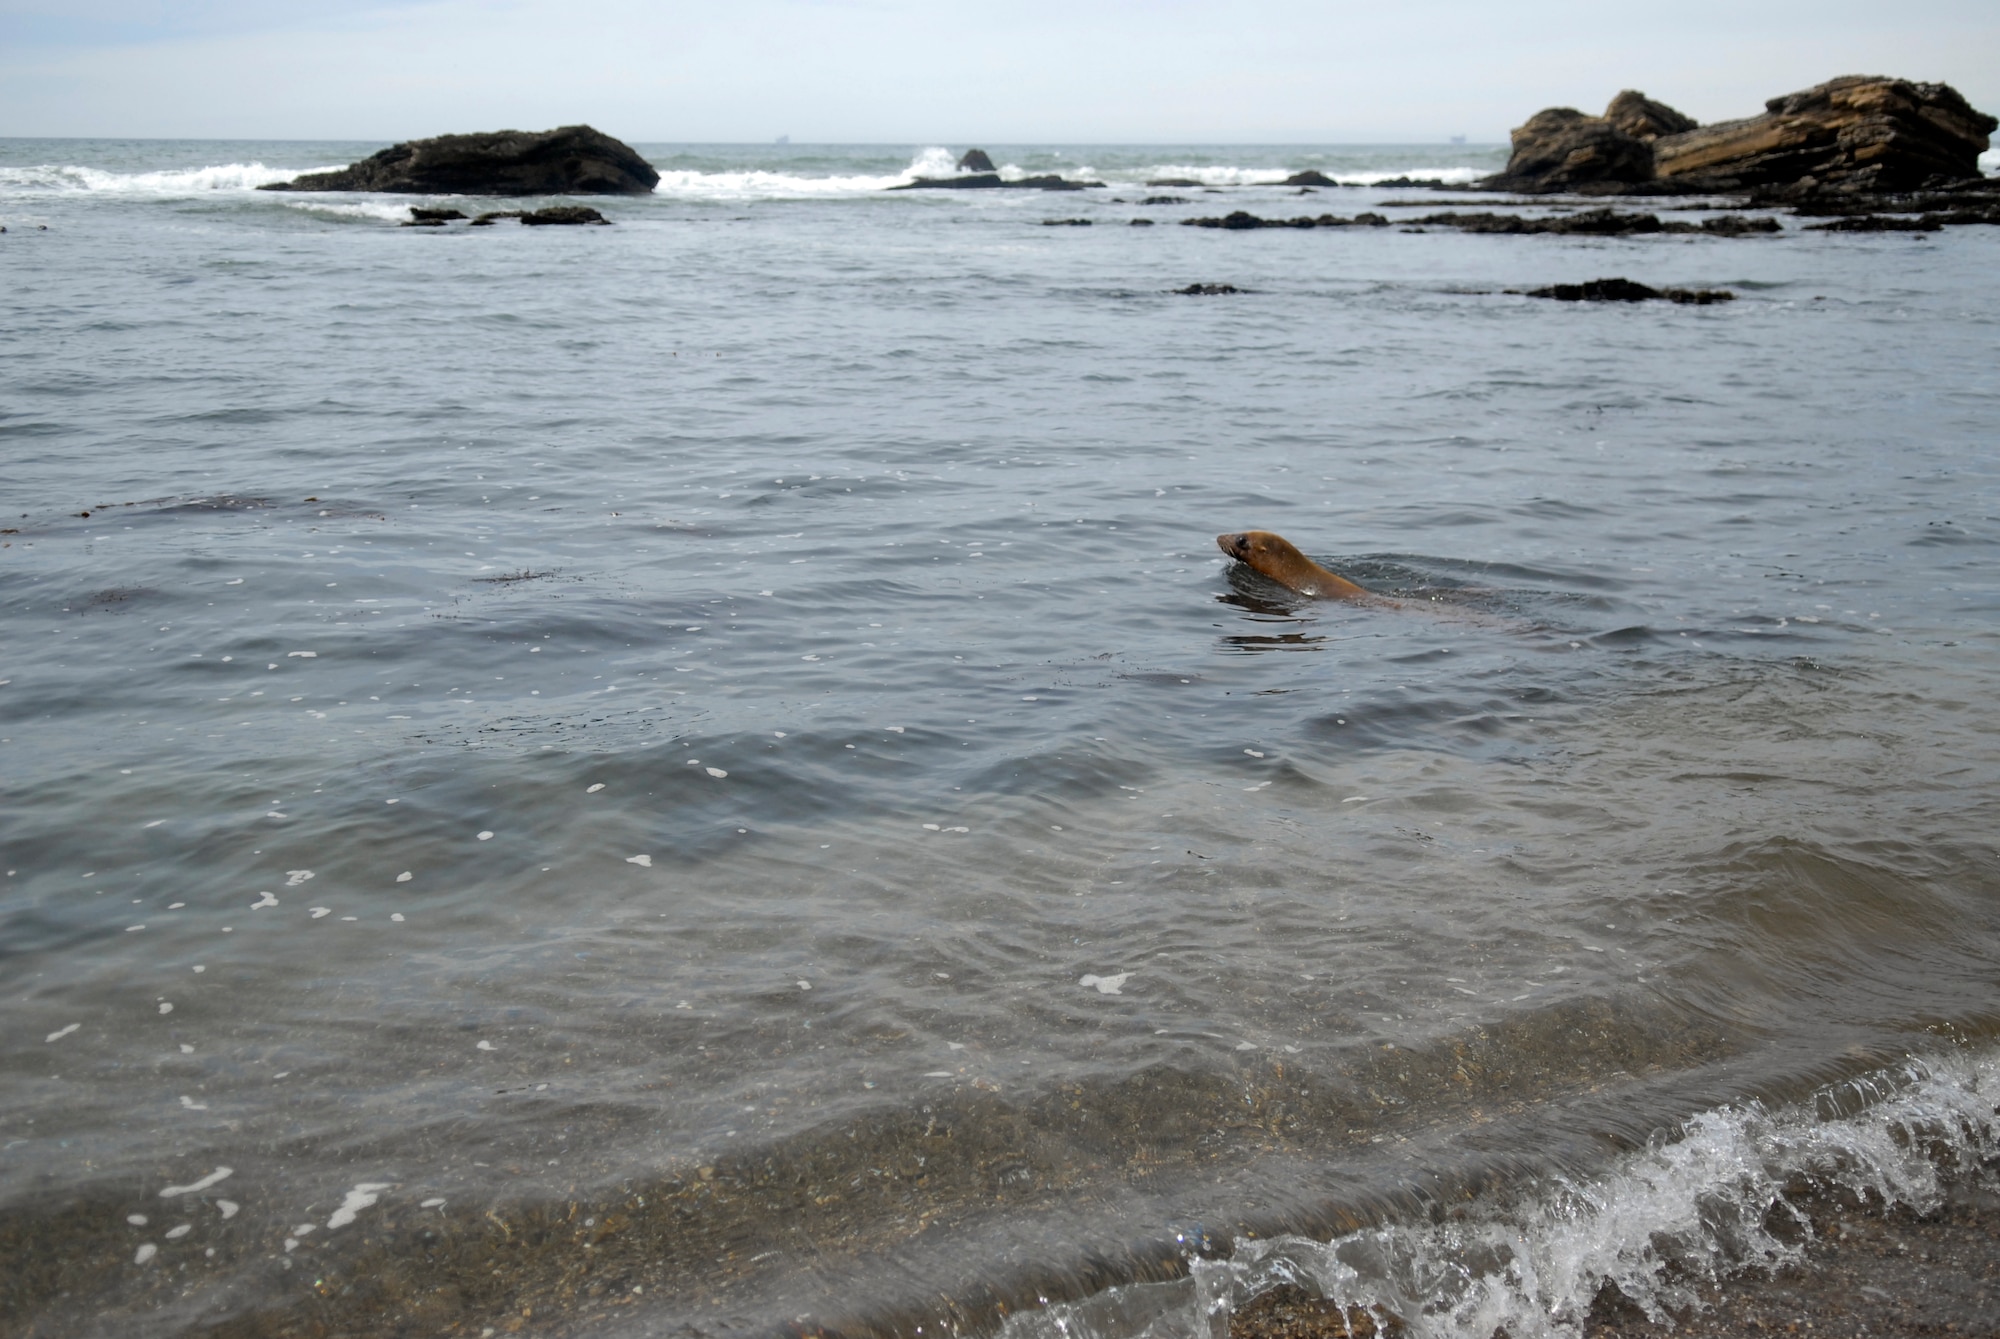 VANDENBERG AIR FORCE BASE, Calif. – An adult female California Sea Lion swims in the ocean after she was released at a remote beach here, Tuesday April 24, 2012.  This sea lion spent more than a month recovering from wounds to her front flipper at the Santa Barbara Marine Mammal Center.  (U.S. Air Force photo/Jennifer Green-Lanchoney)